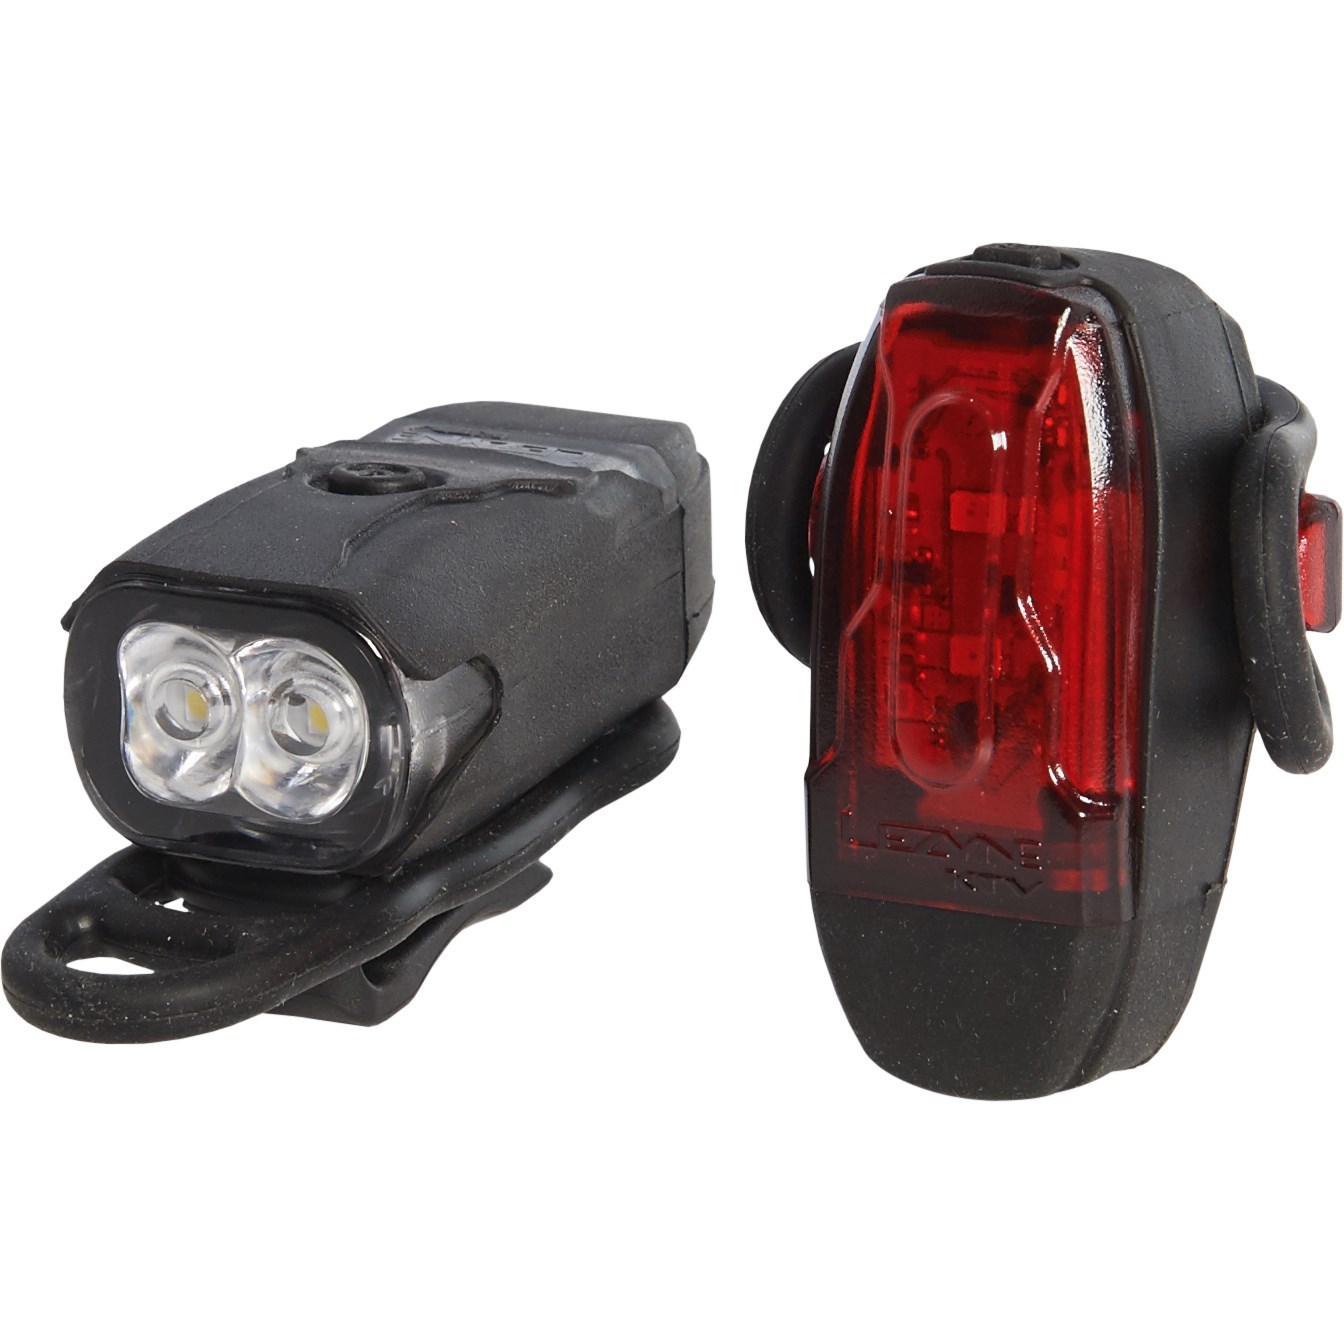 Lezyne KTV LED bicycle light front and rear USB rechargeable all colours 